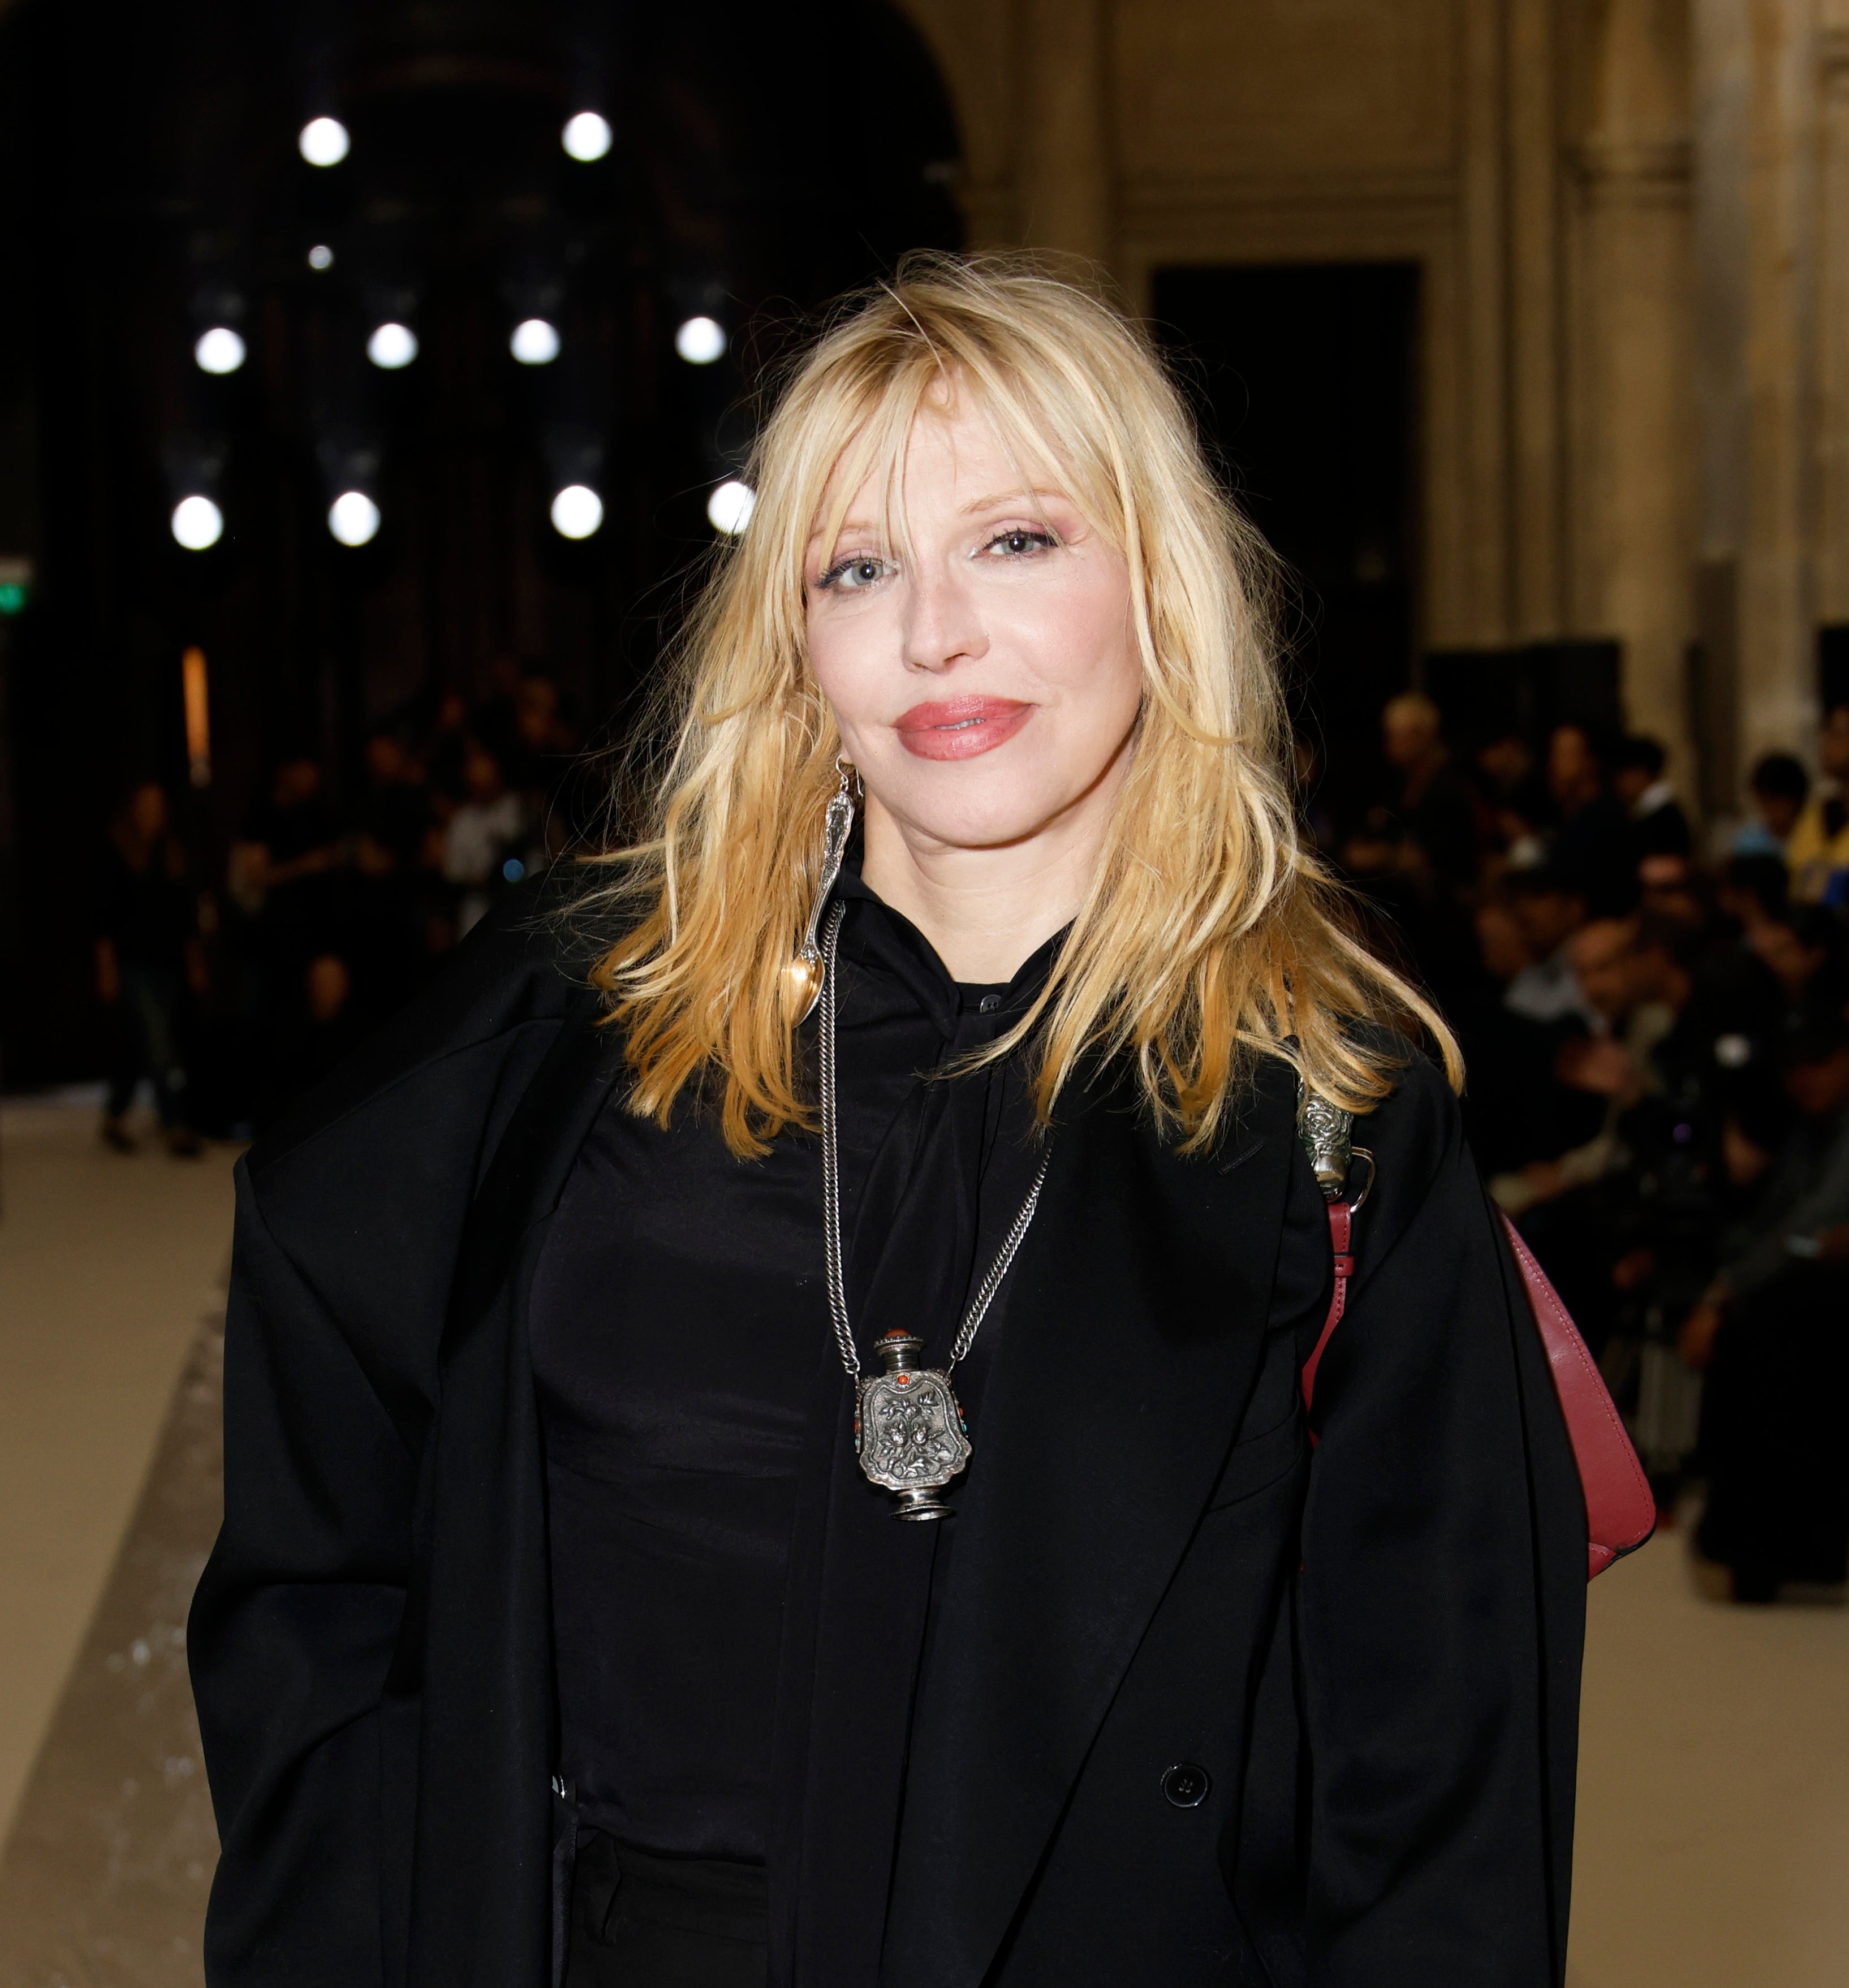 Courtney Love at an event wearing a blazer with a silver pendant